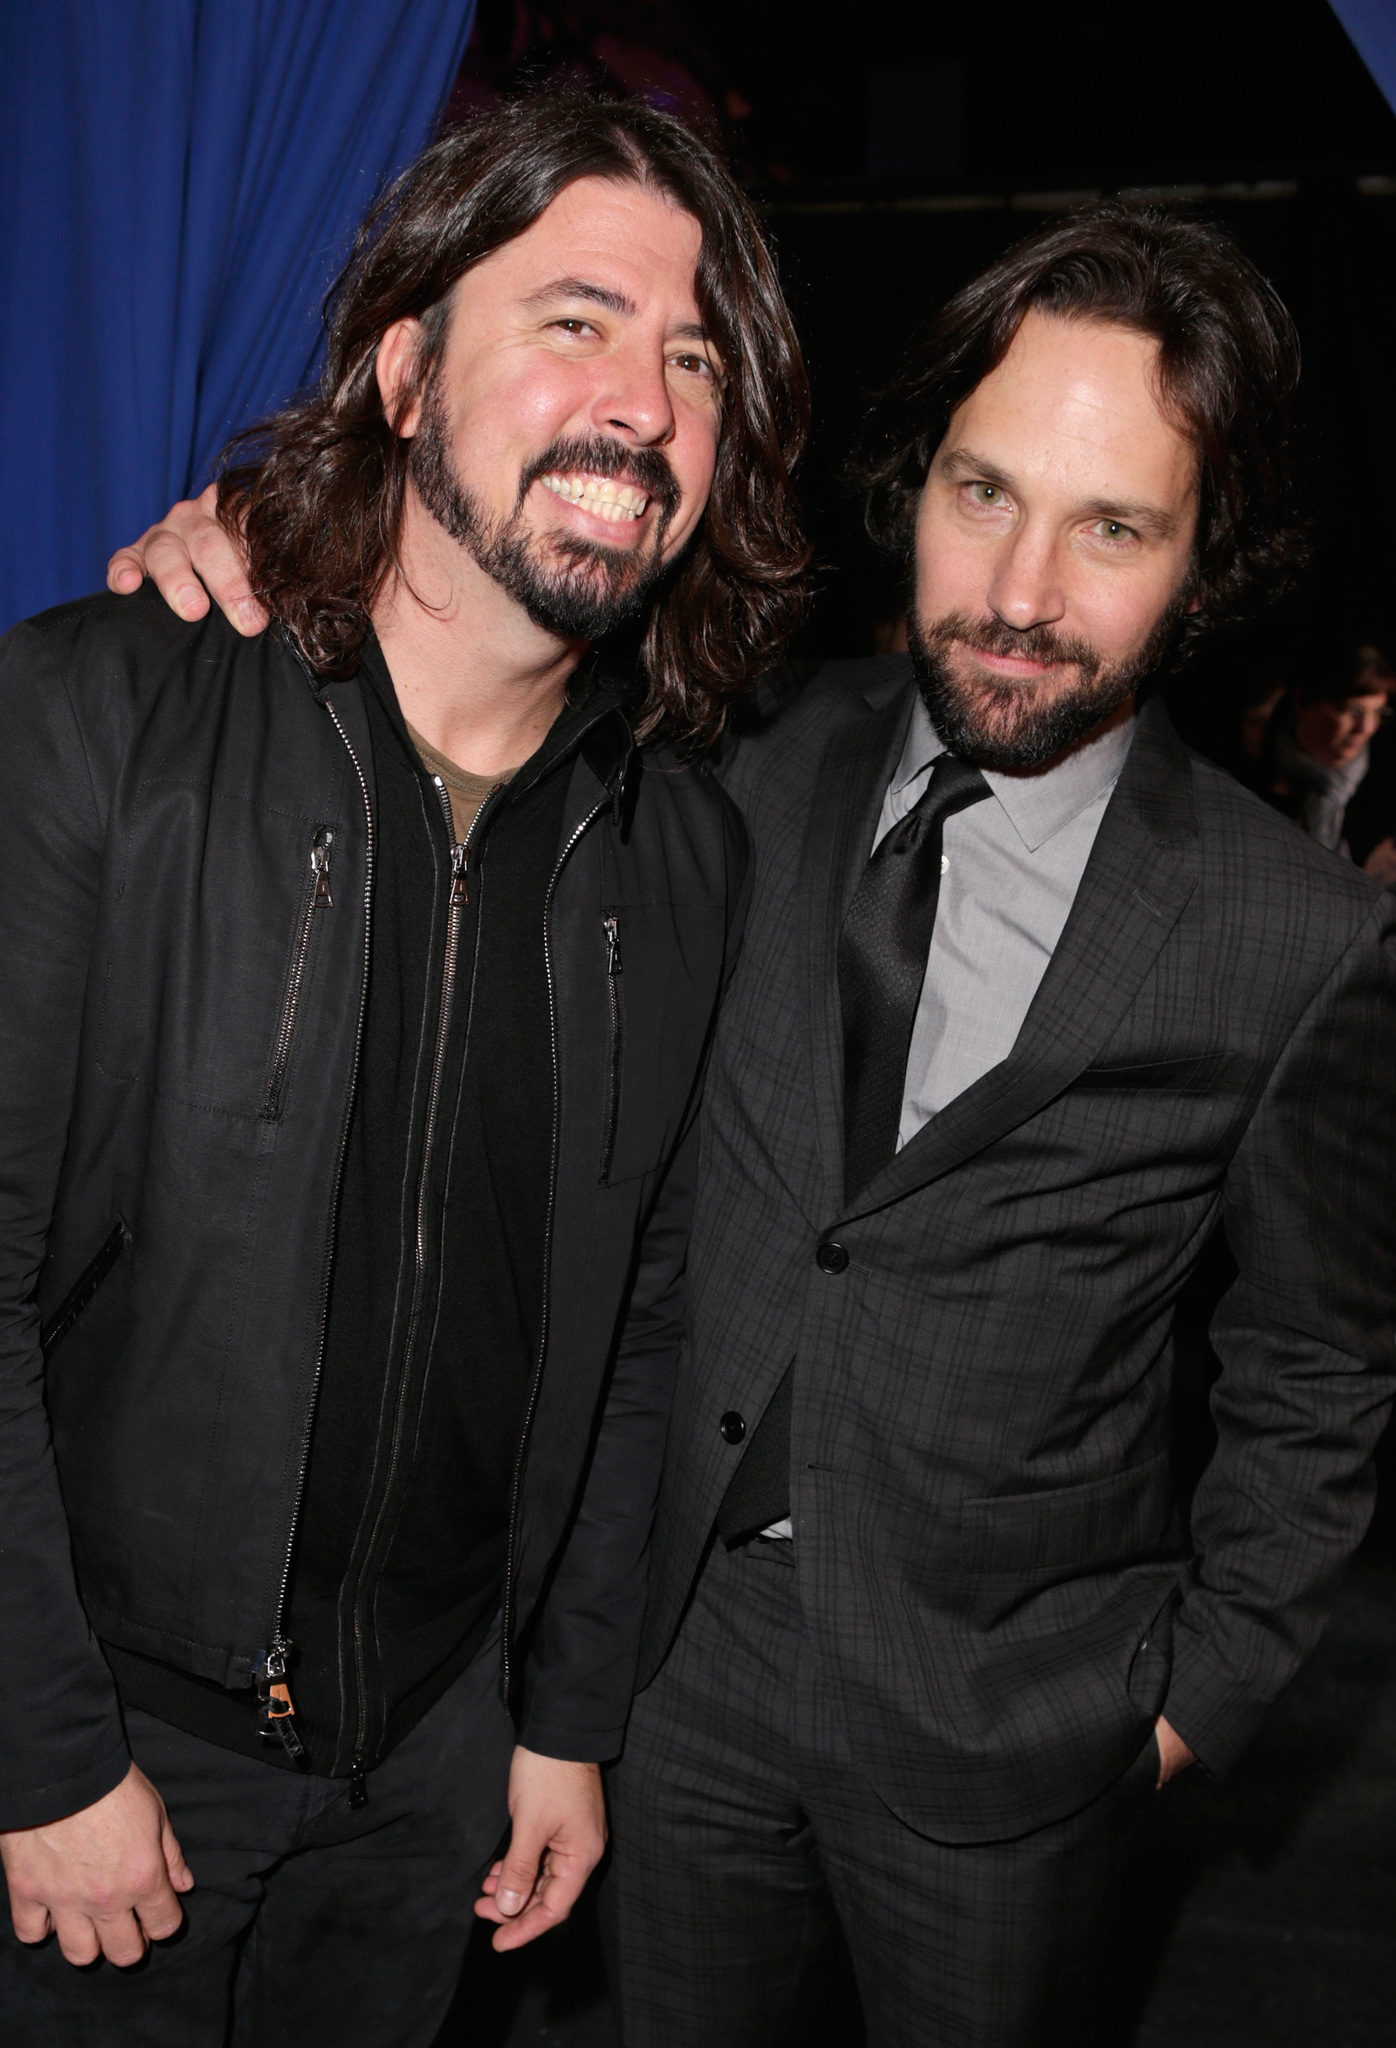 Dave Grohl and Paul Rudd